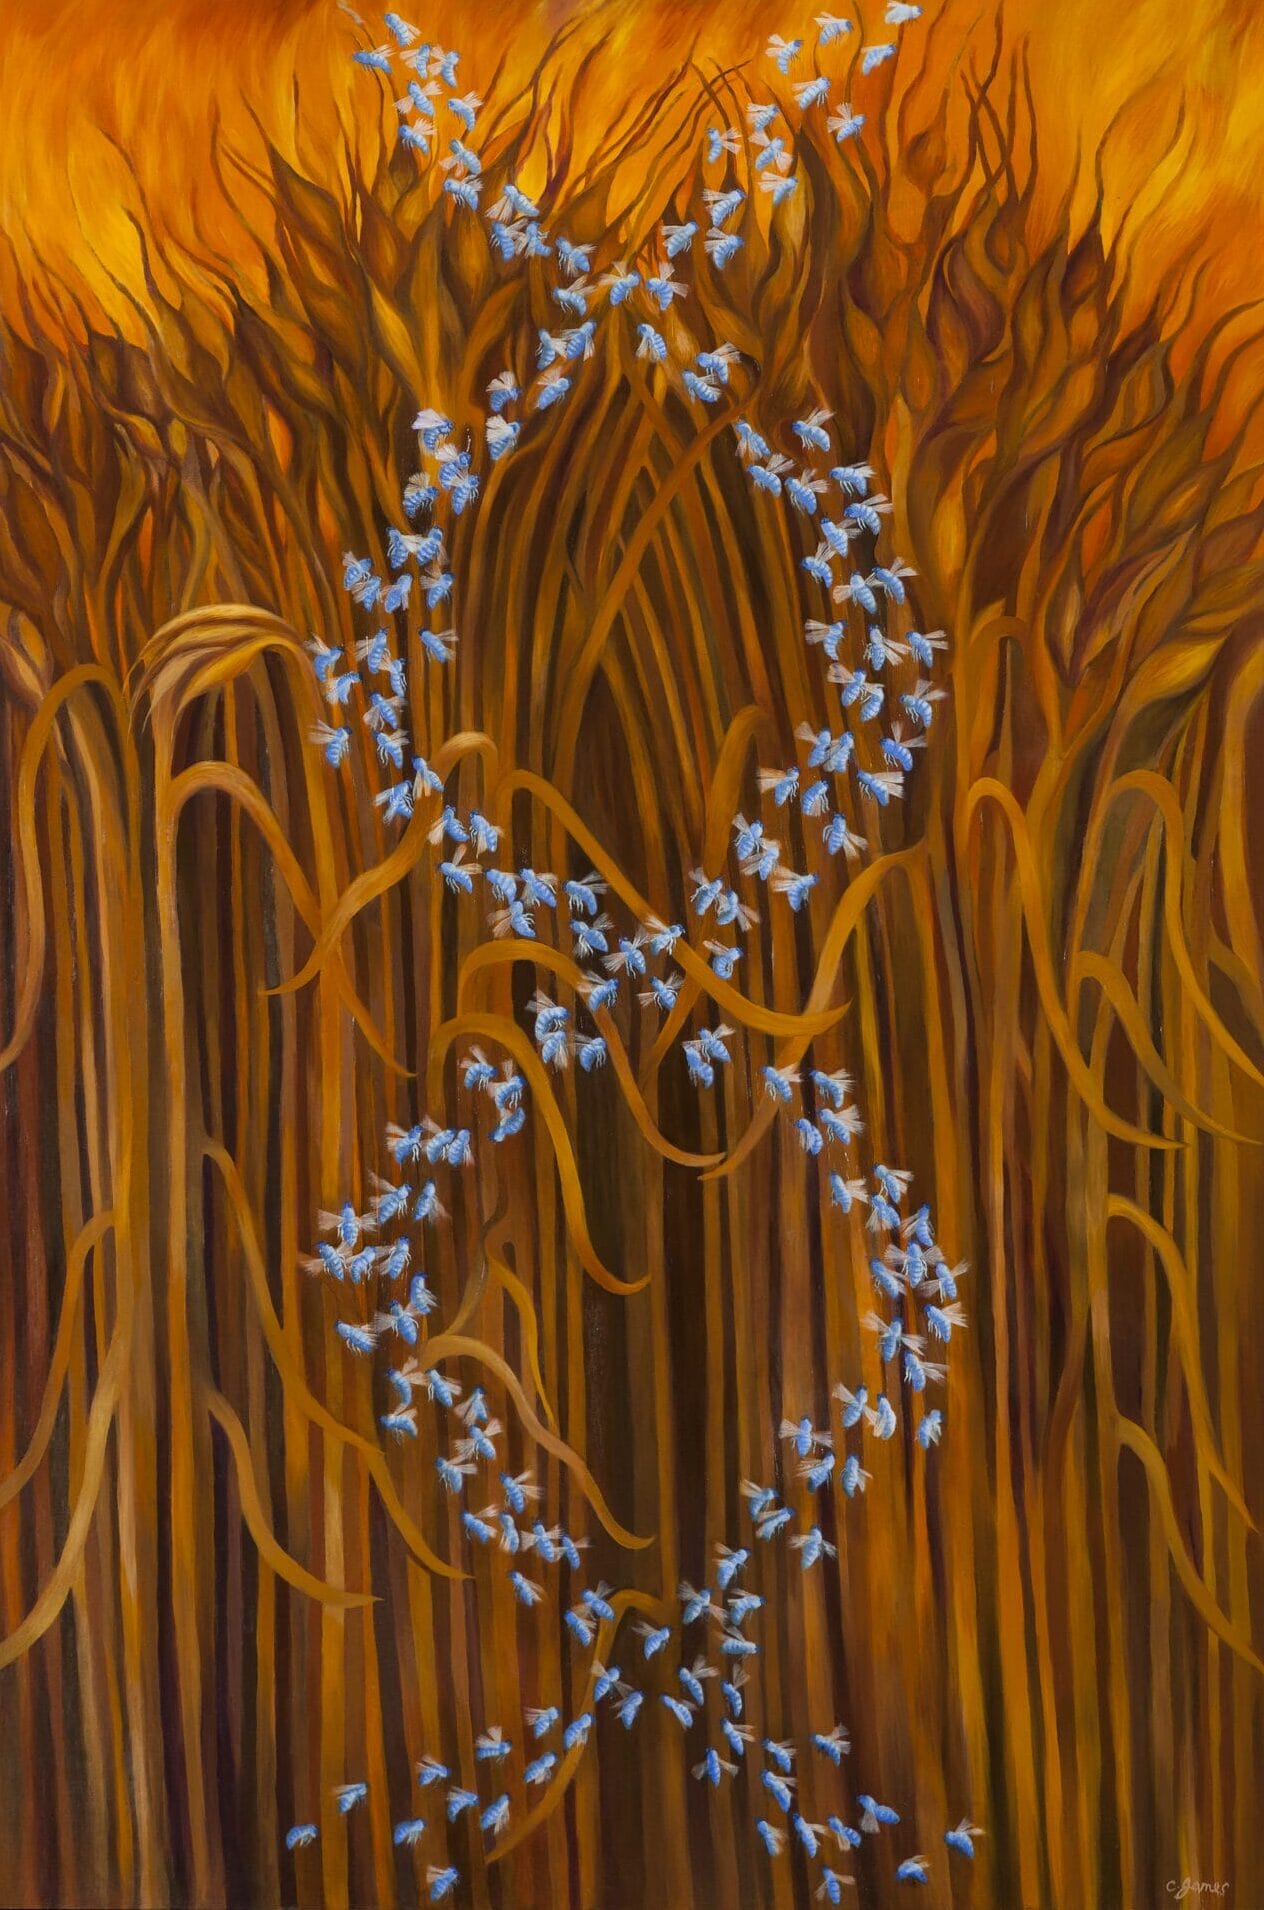 Against tall, burnt orange plants resembling corn stalks, bright blue bees hover in the form of a double helix.